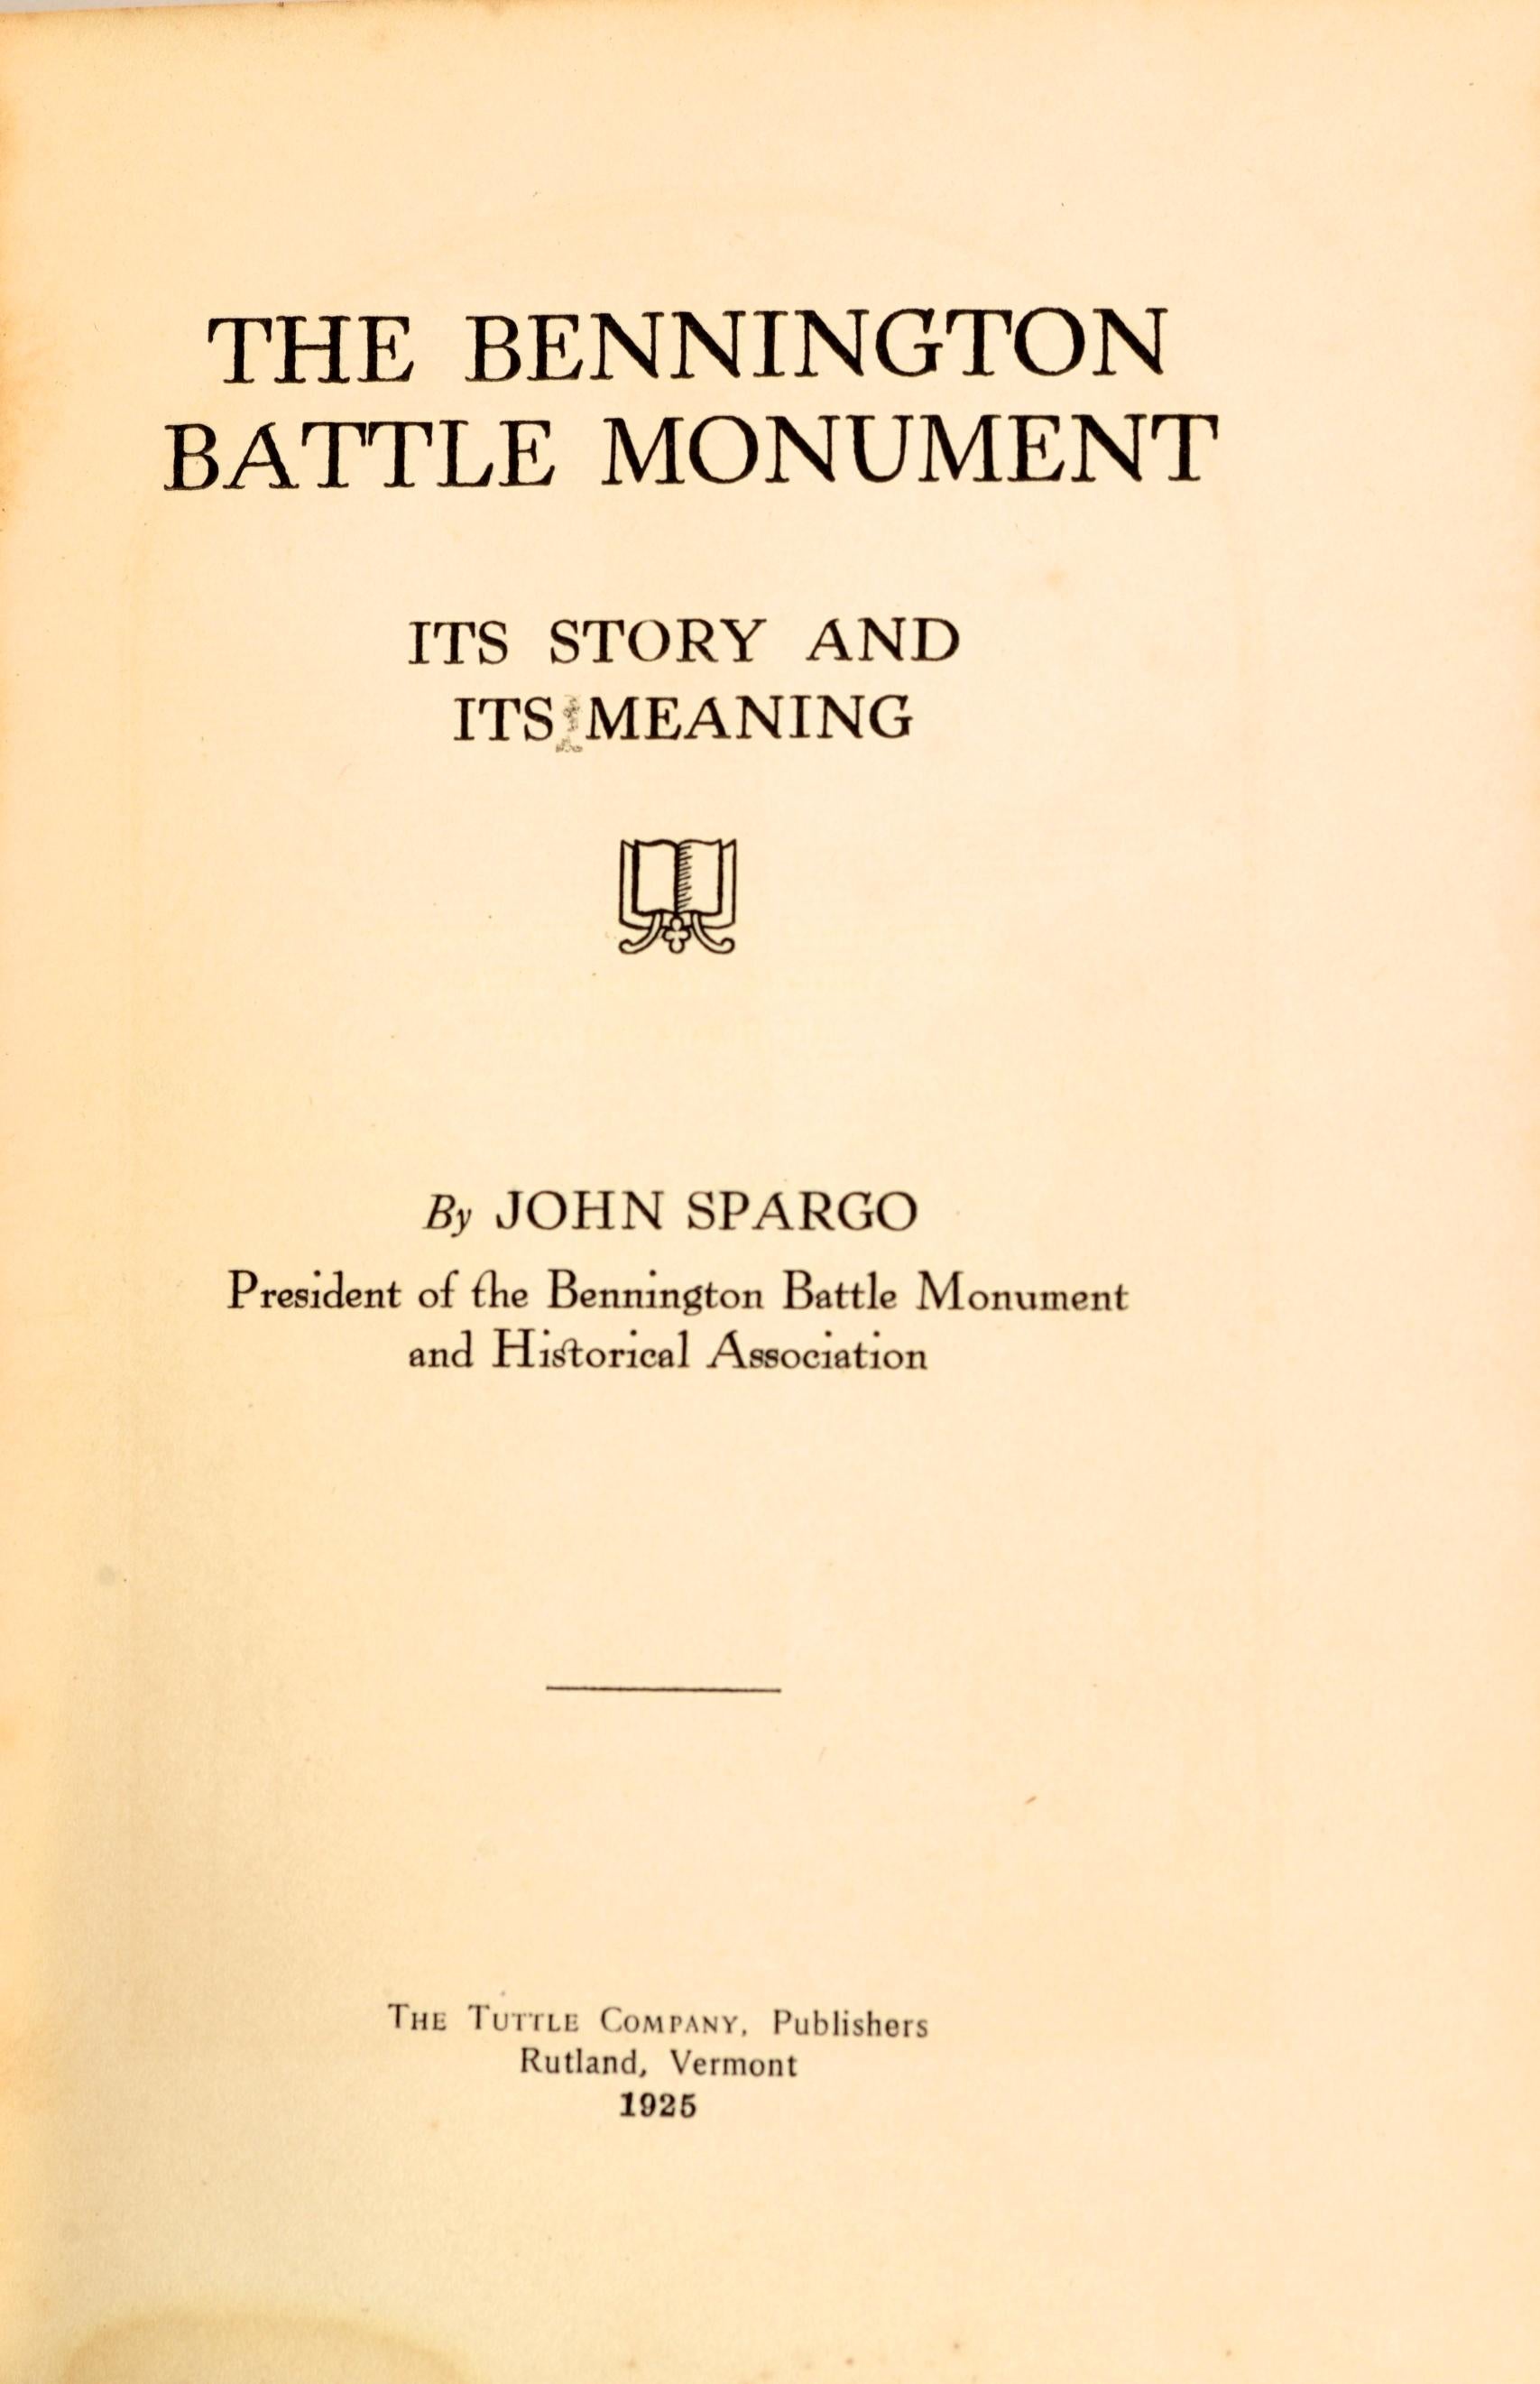 The Bennington Battle Monument Its Story and Its Meaning by John Spargo. The Tuttle Company, Rutland, Vermont, 1925. First Edition hardcover no dust jacket. An overview of the history, construction, and meaning of the Bennington Battle Monument by